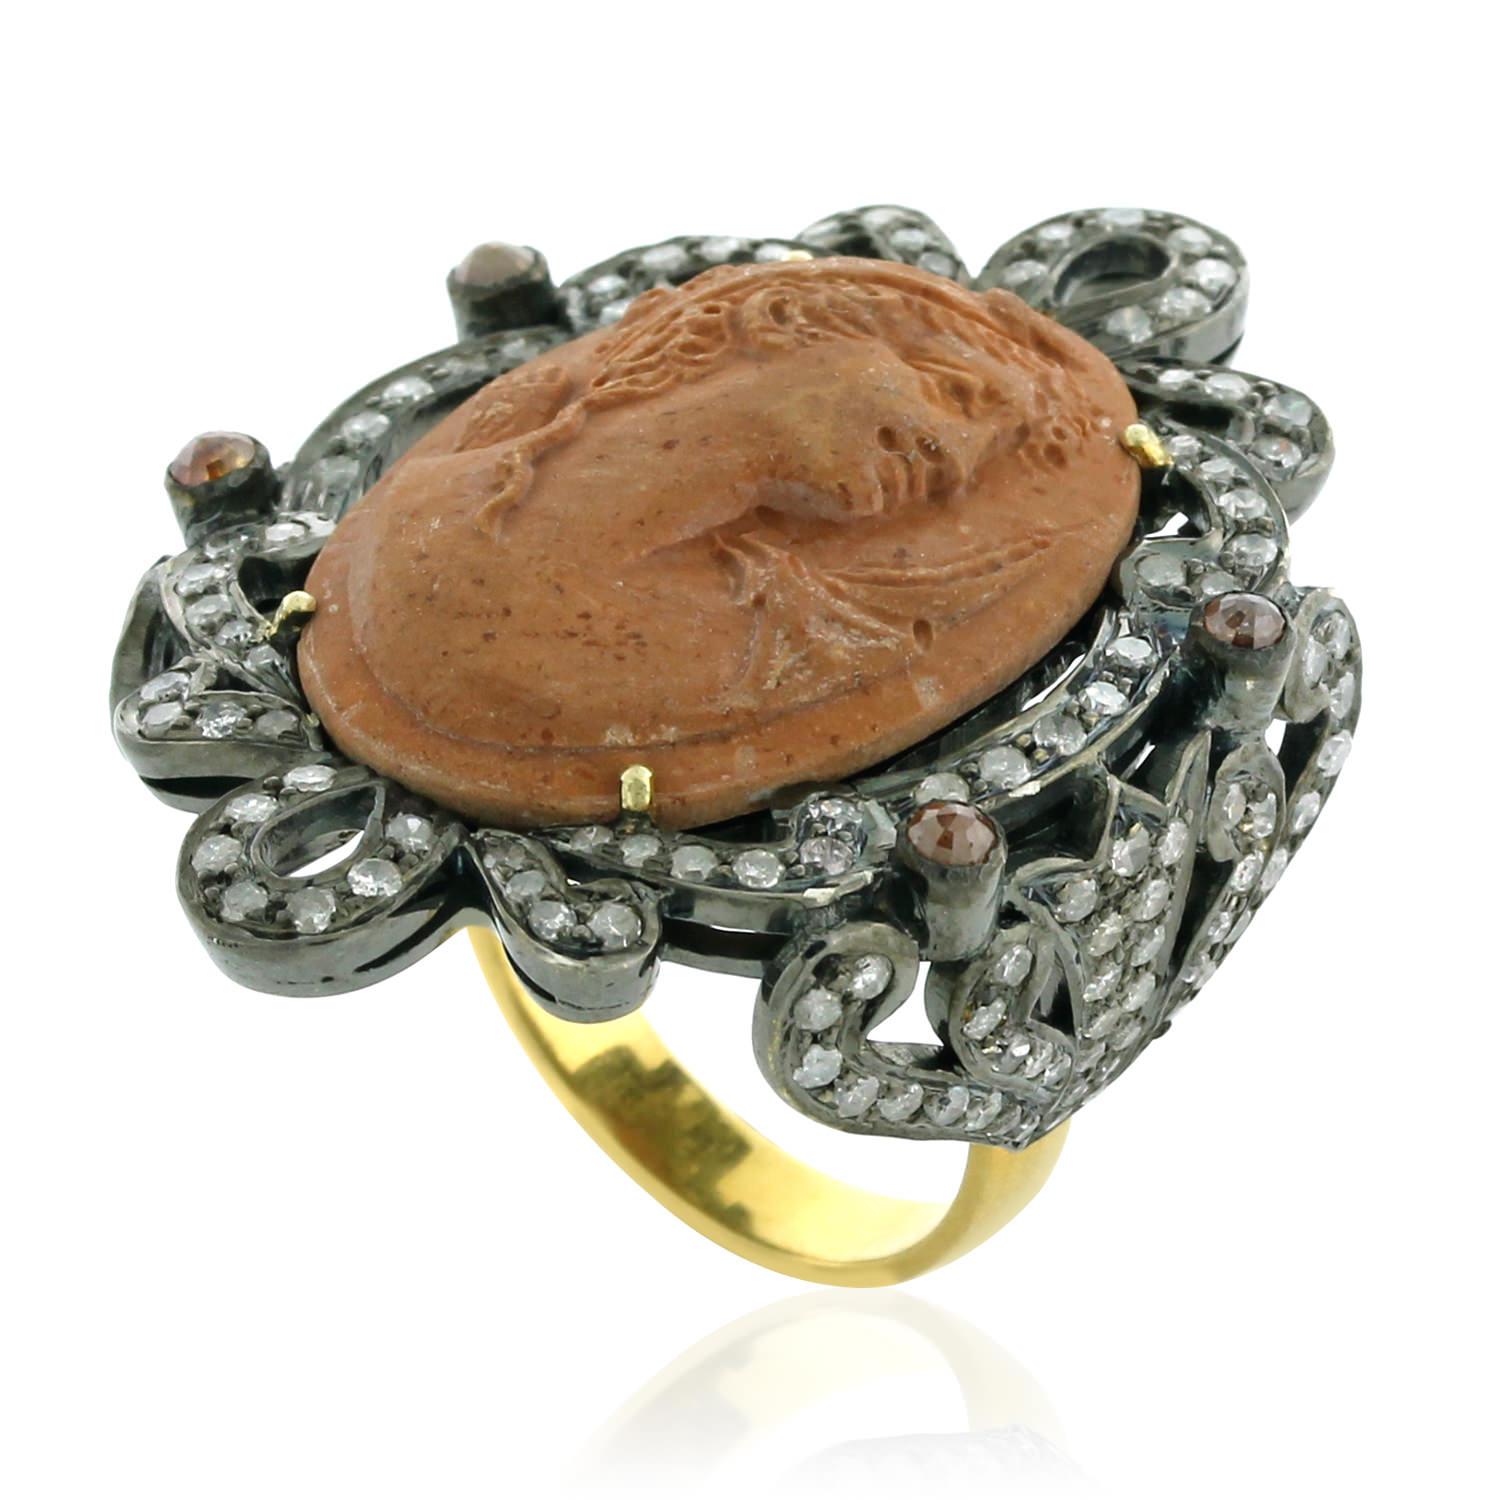 This gorgeous looking Lava Cameo Ring with Diamonds set in silver and gold is all hand carved and handmade truly a unique one.

Ring Size: 7 ( can be sized )

18kt gold: 2.59gms
Diamond: 1.77cts
Silver: 7.77gms
Cameo : 14.50cts
